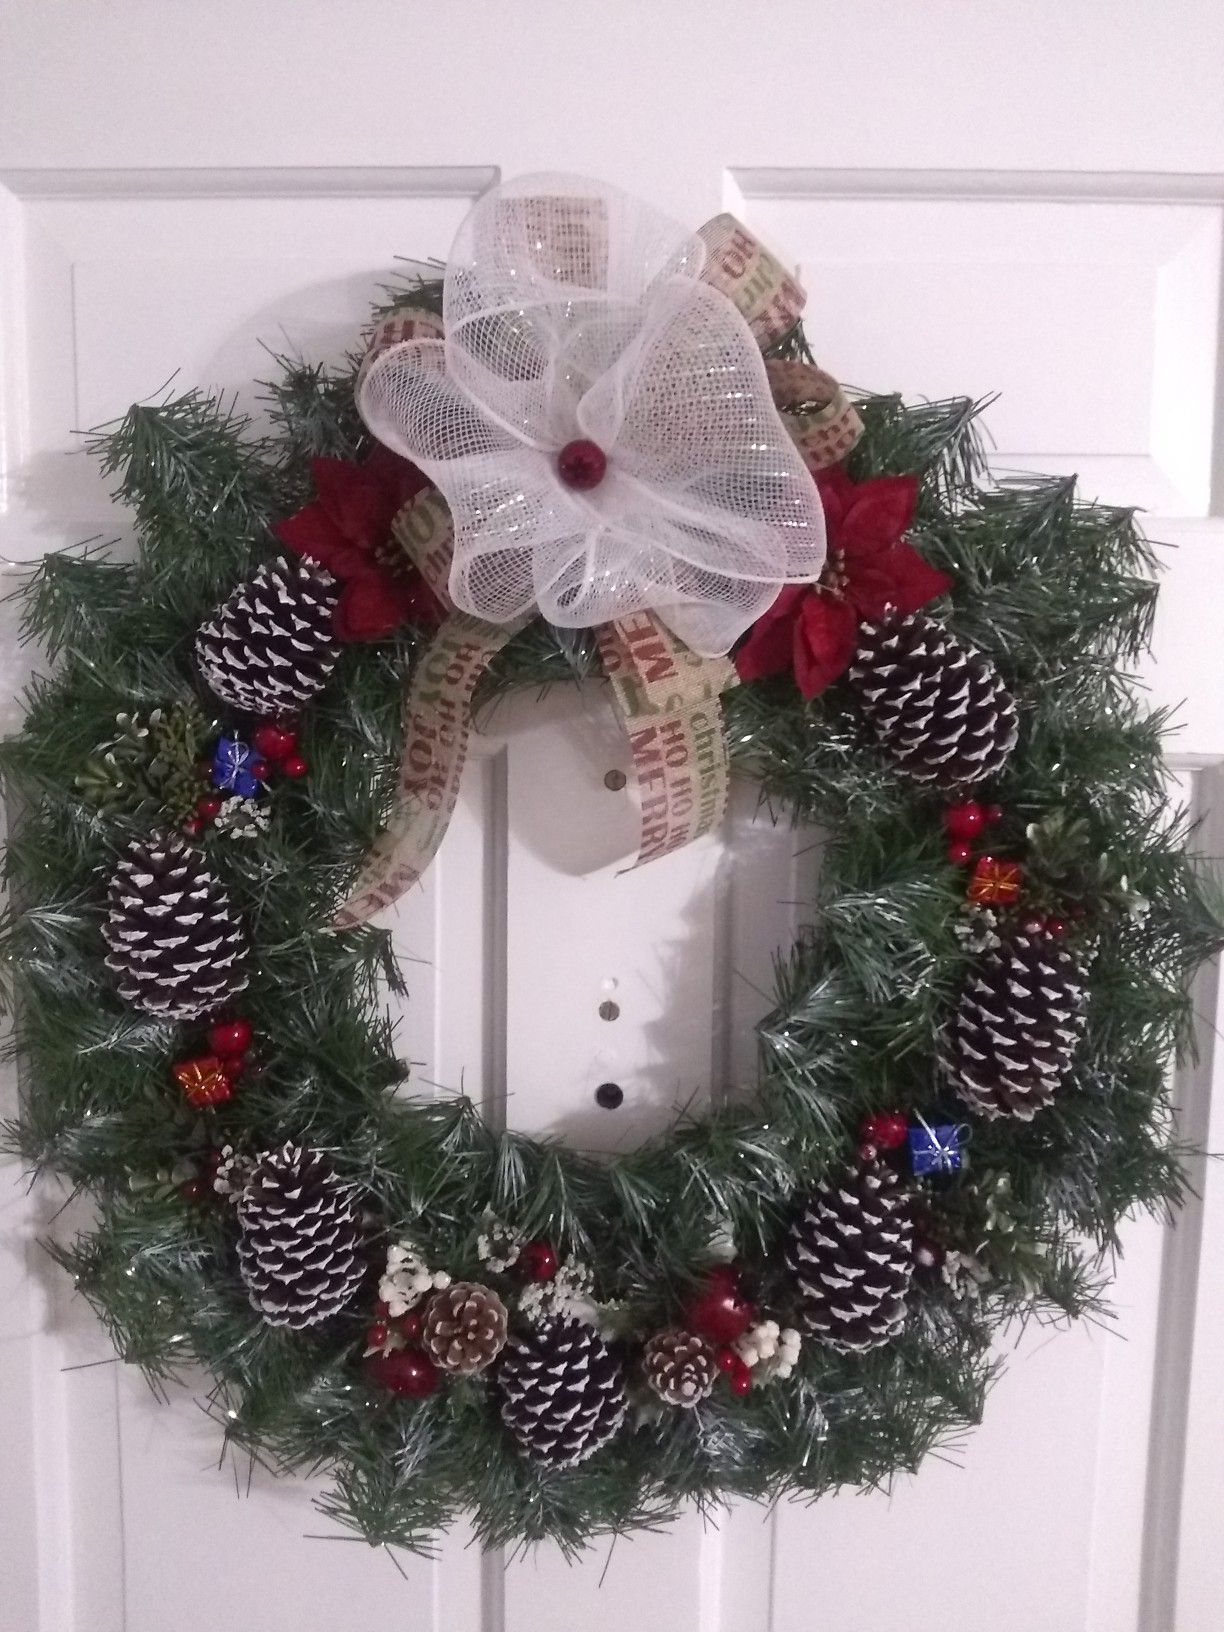 Hand crafted Christmas wreath